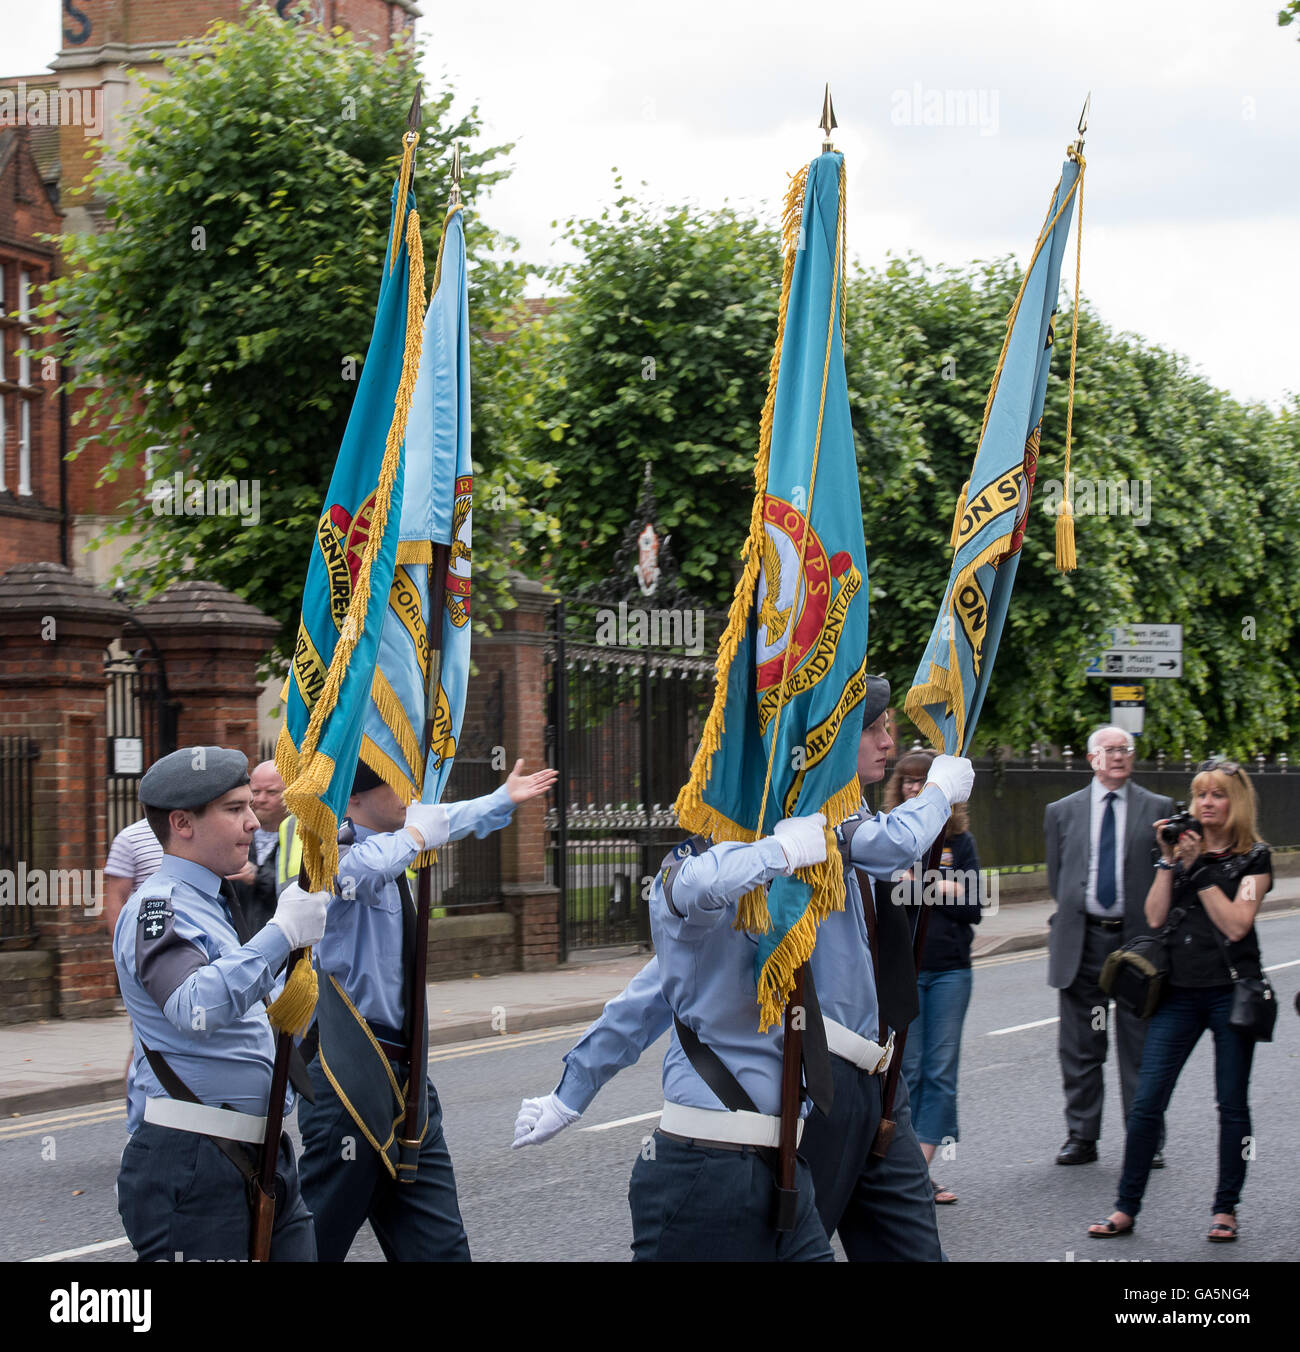 Brentwood Essex, 3rd July 2016, Airr Training Corps cadets of the Essex  Wing march past oon the 75th anniversary of the ATC Credit:  Ian Davidson/Alamy Live News Stock Photo